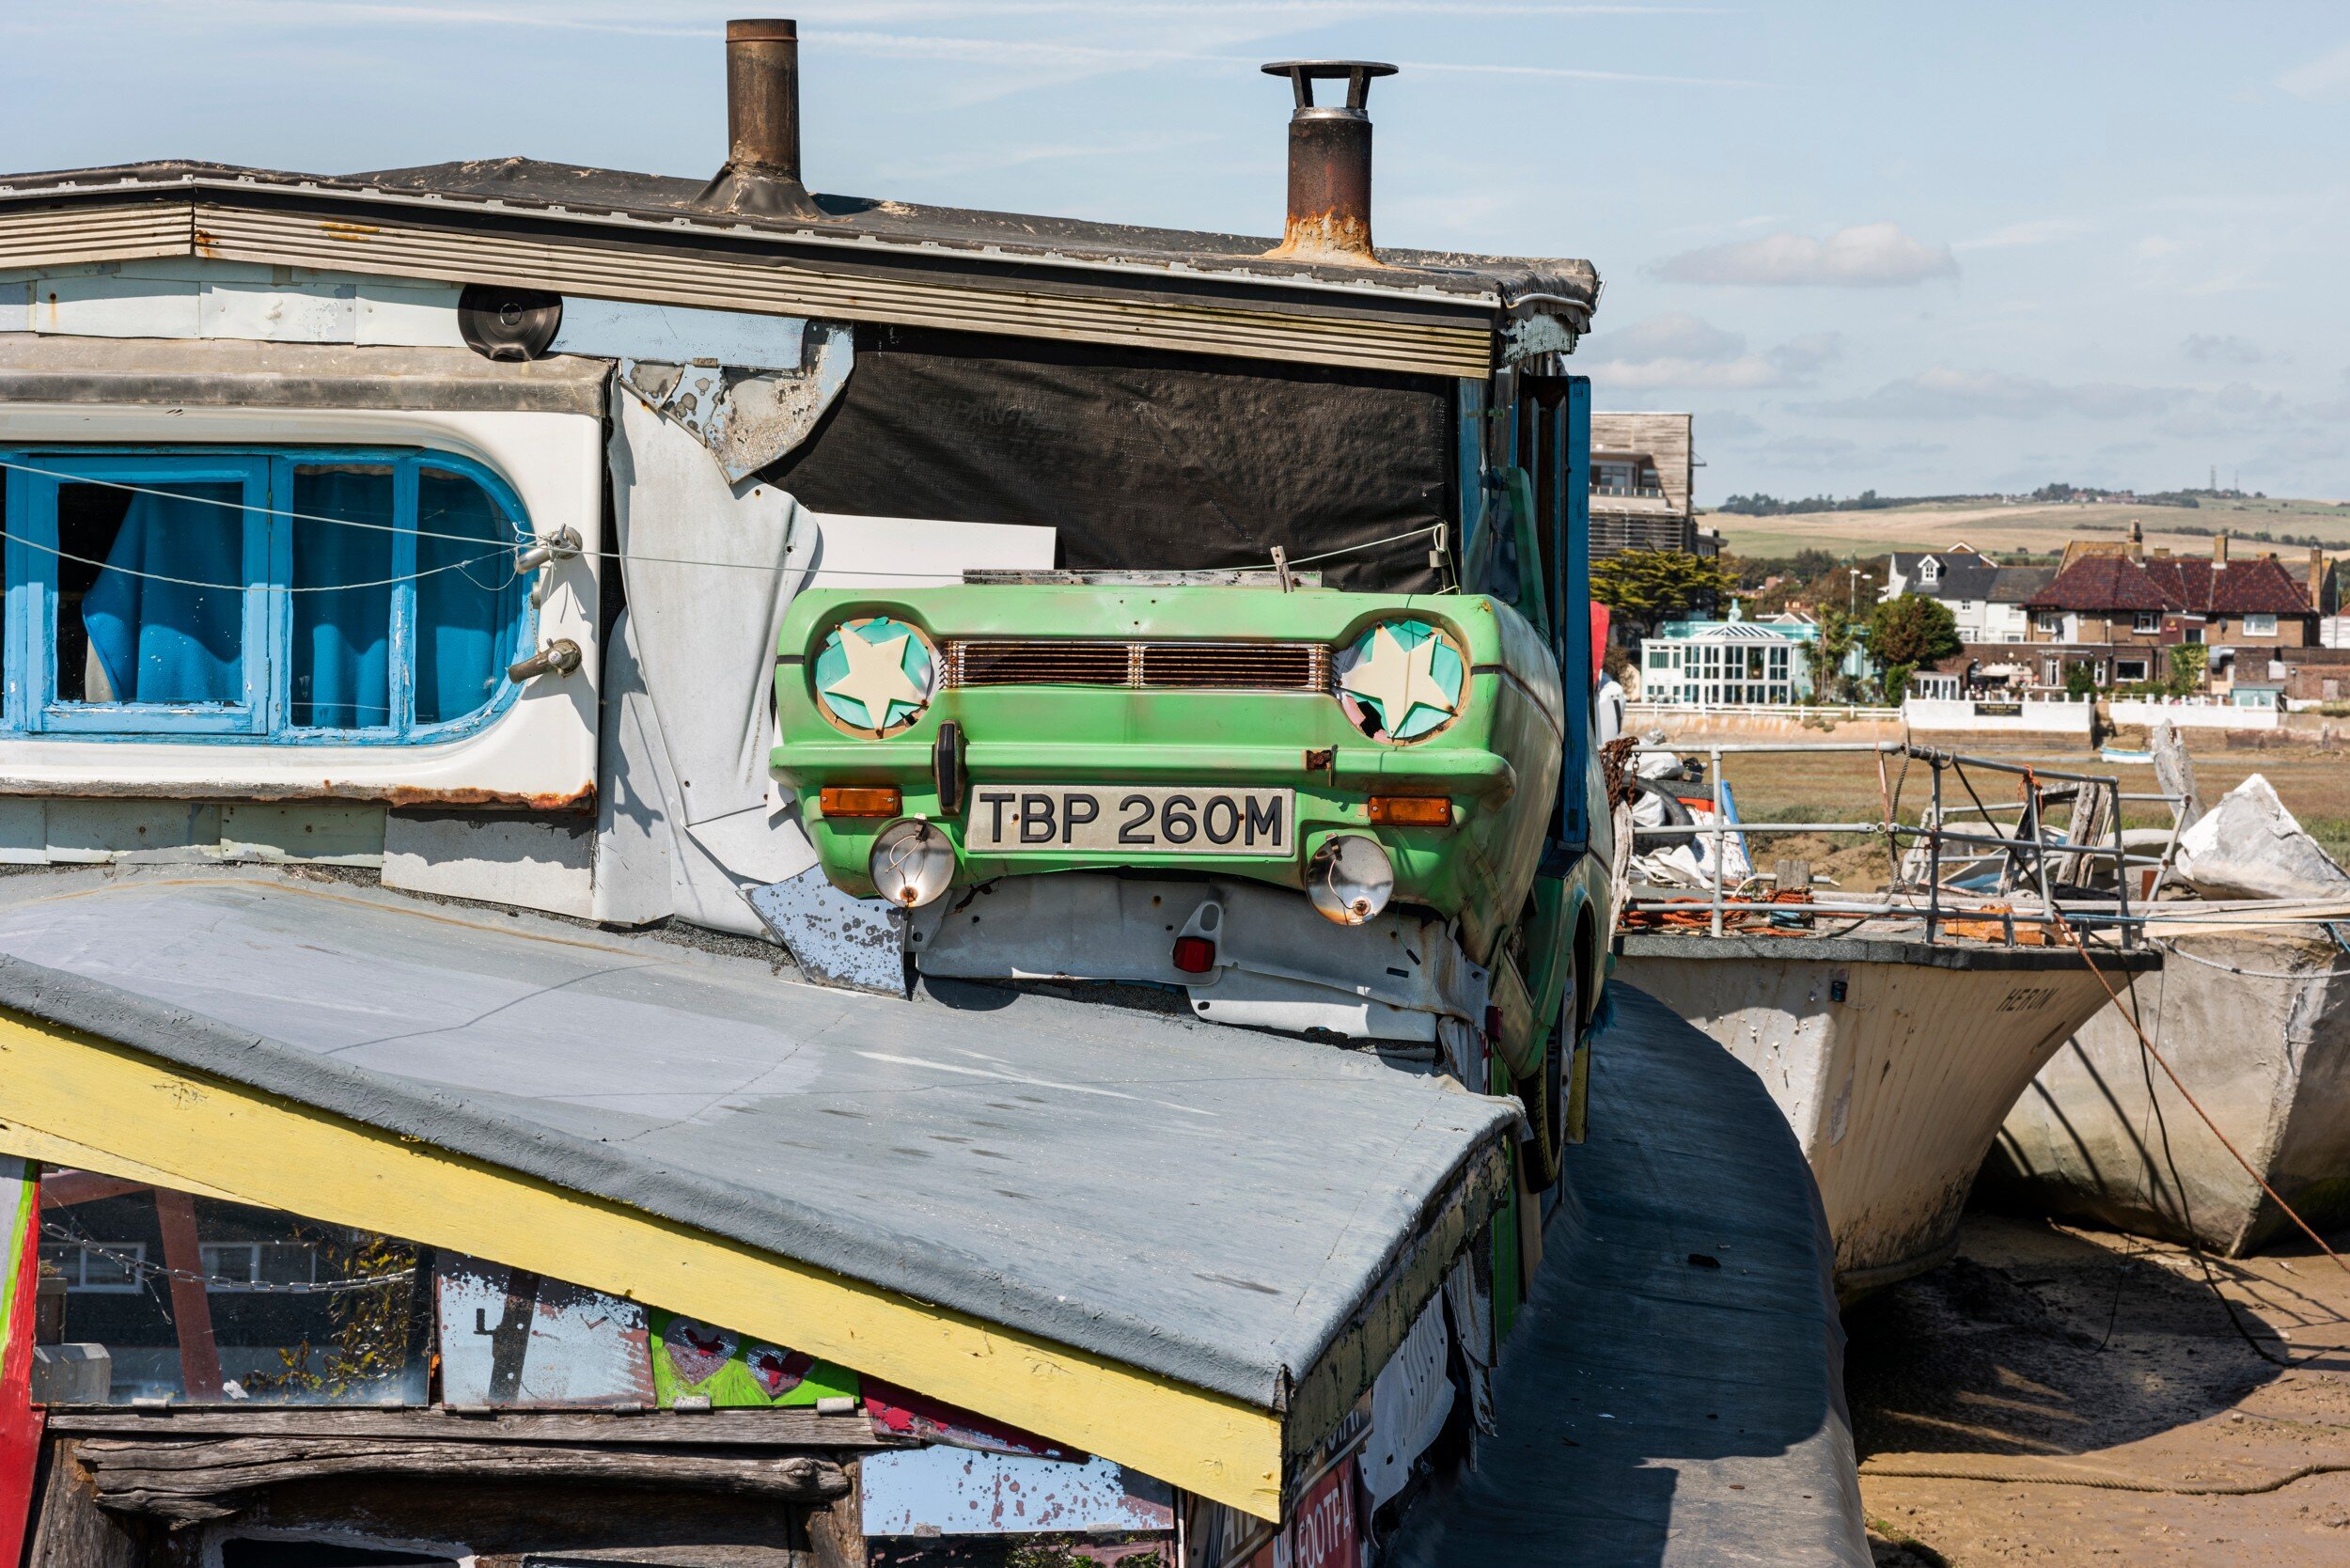 15 Shoreham Boatyard - Shoreham by Sea - East Sussex - Hamish McKenzie - The Keepers Project - David Clegg -Thierry Bal.jpg